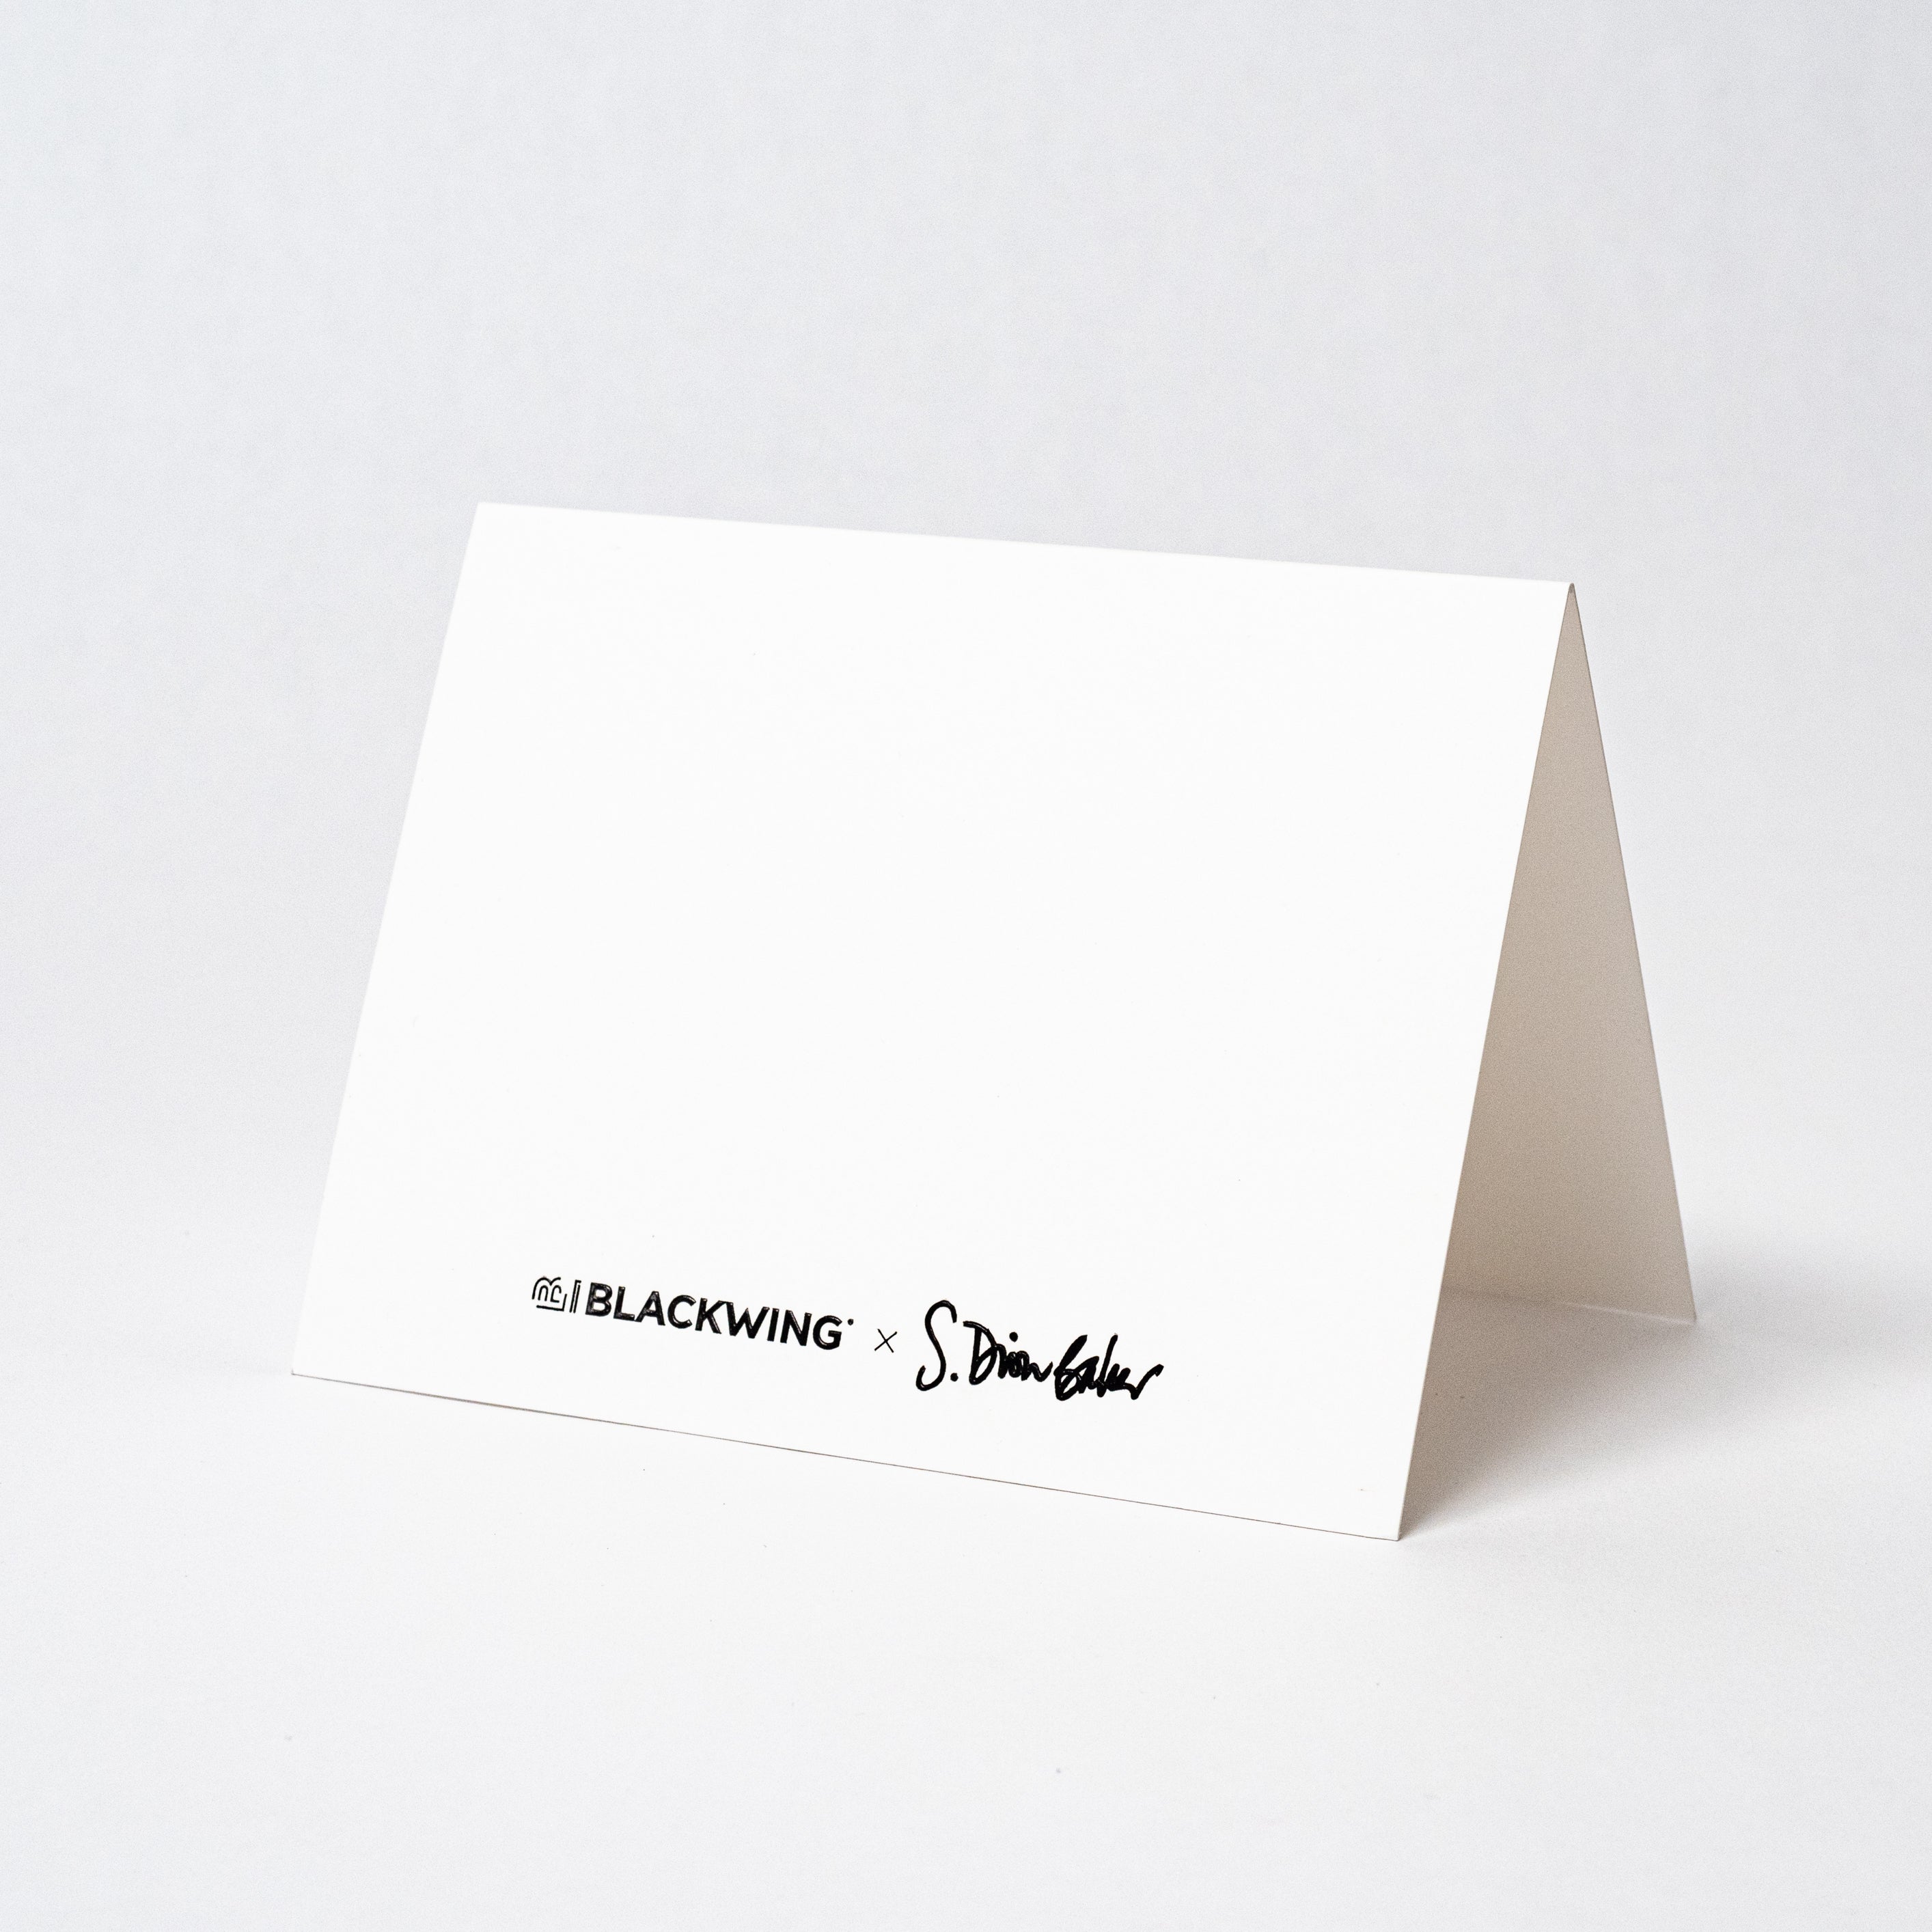 Limited edition Blackwing Volumes Notecard featuring black writing designed by Samantha Dion Baker.